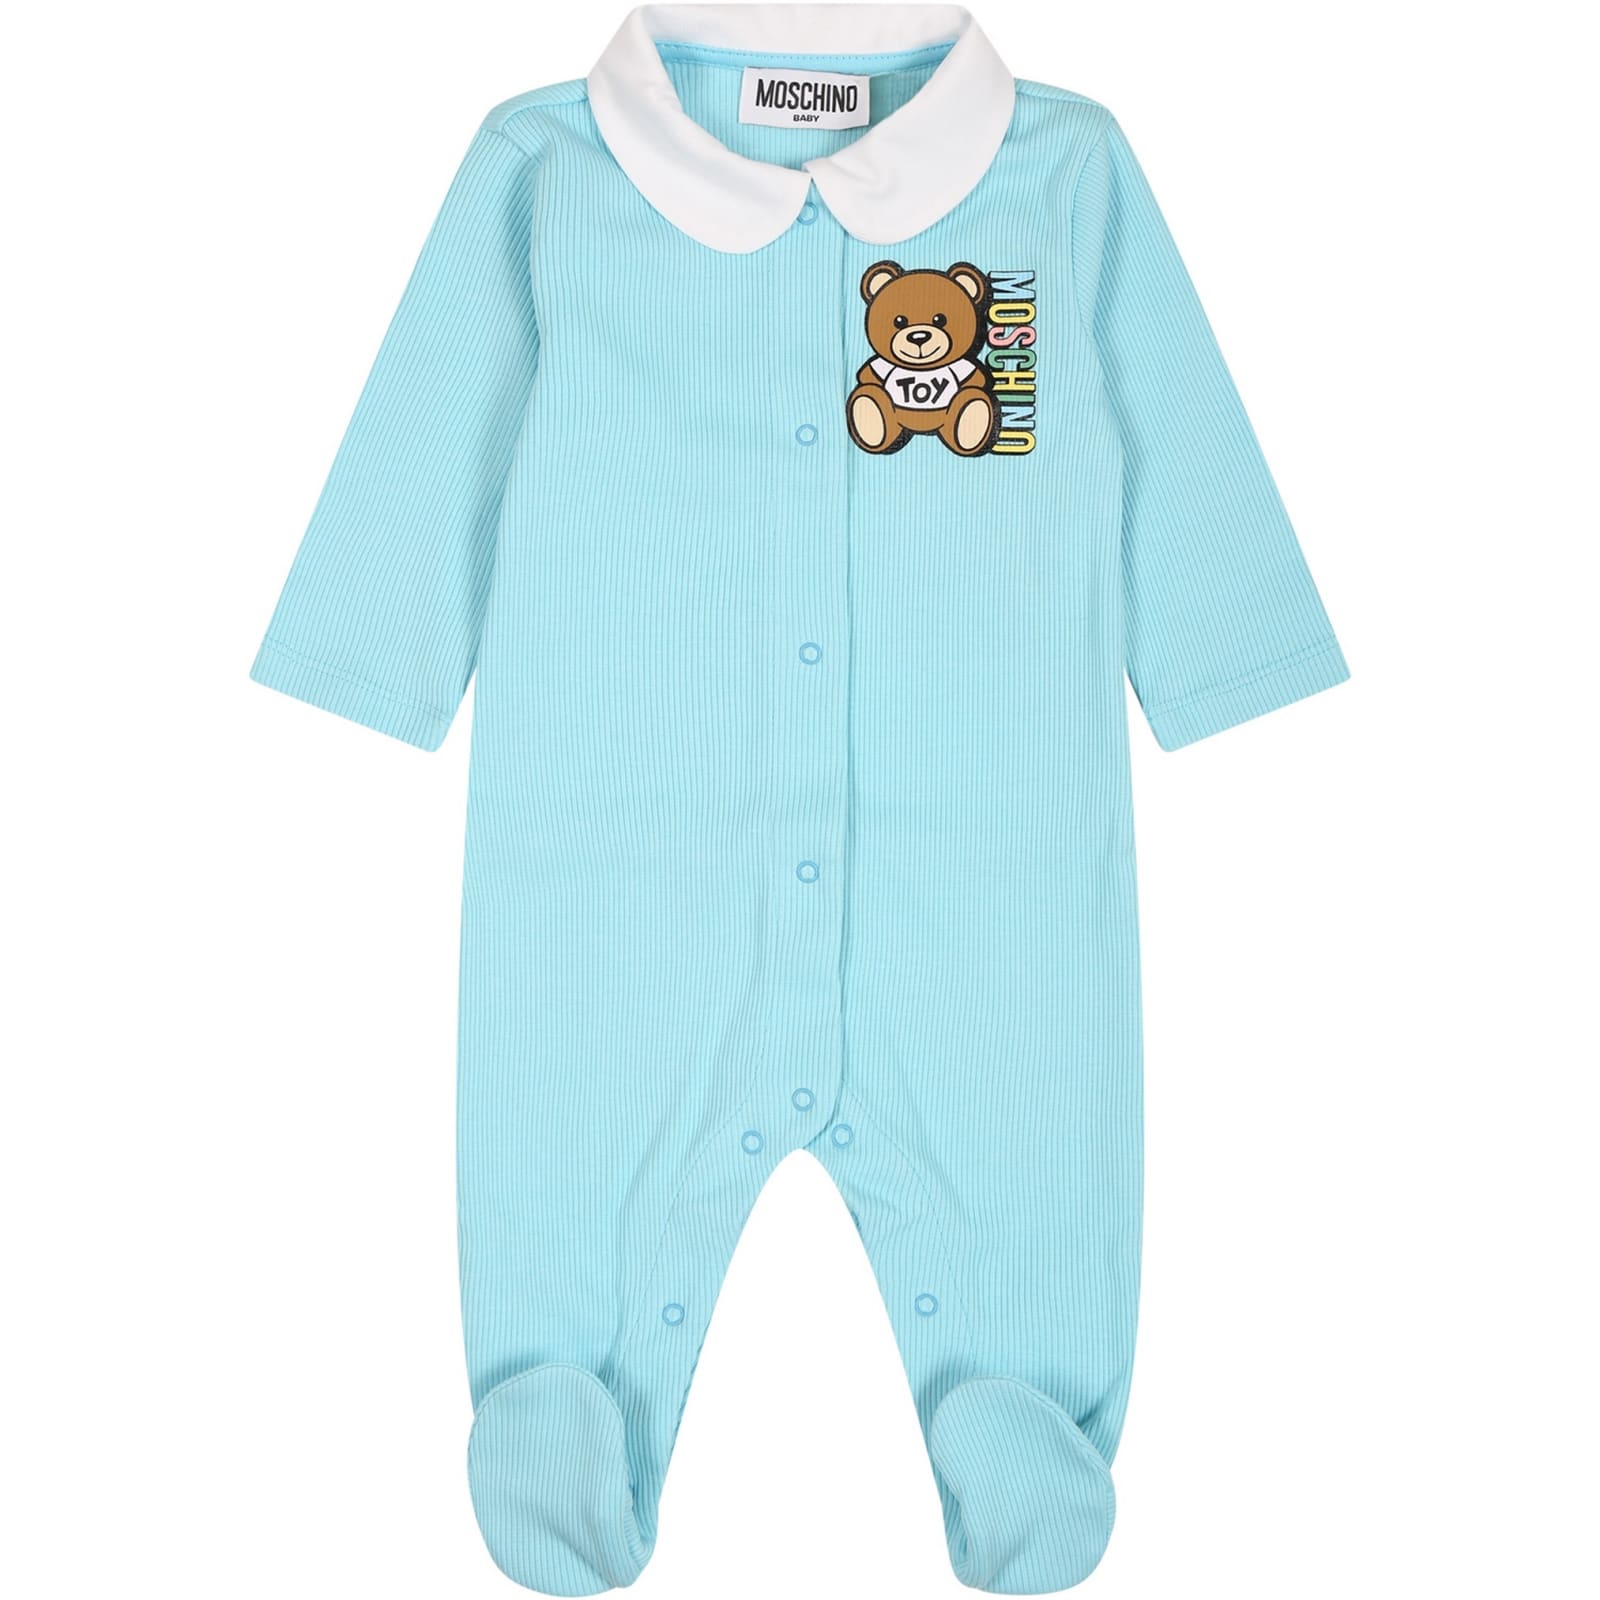 Moschino Light Blue Babygrow For Baby Boy With Teddy Bear And Logo